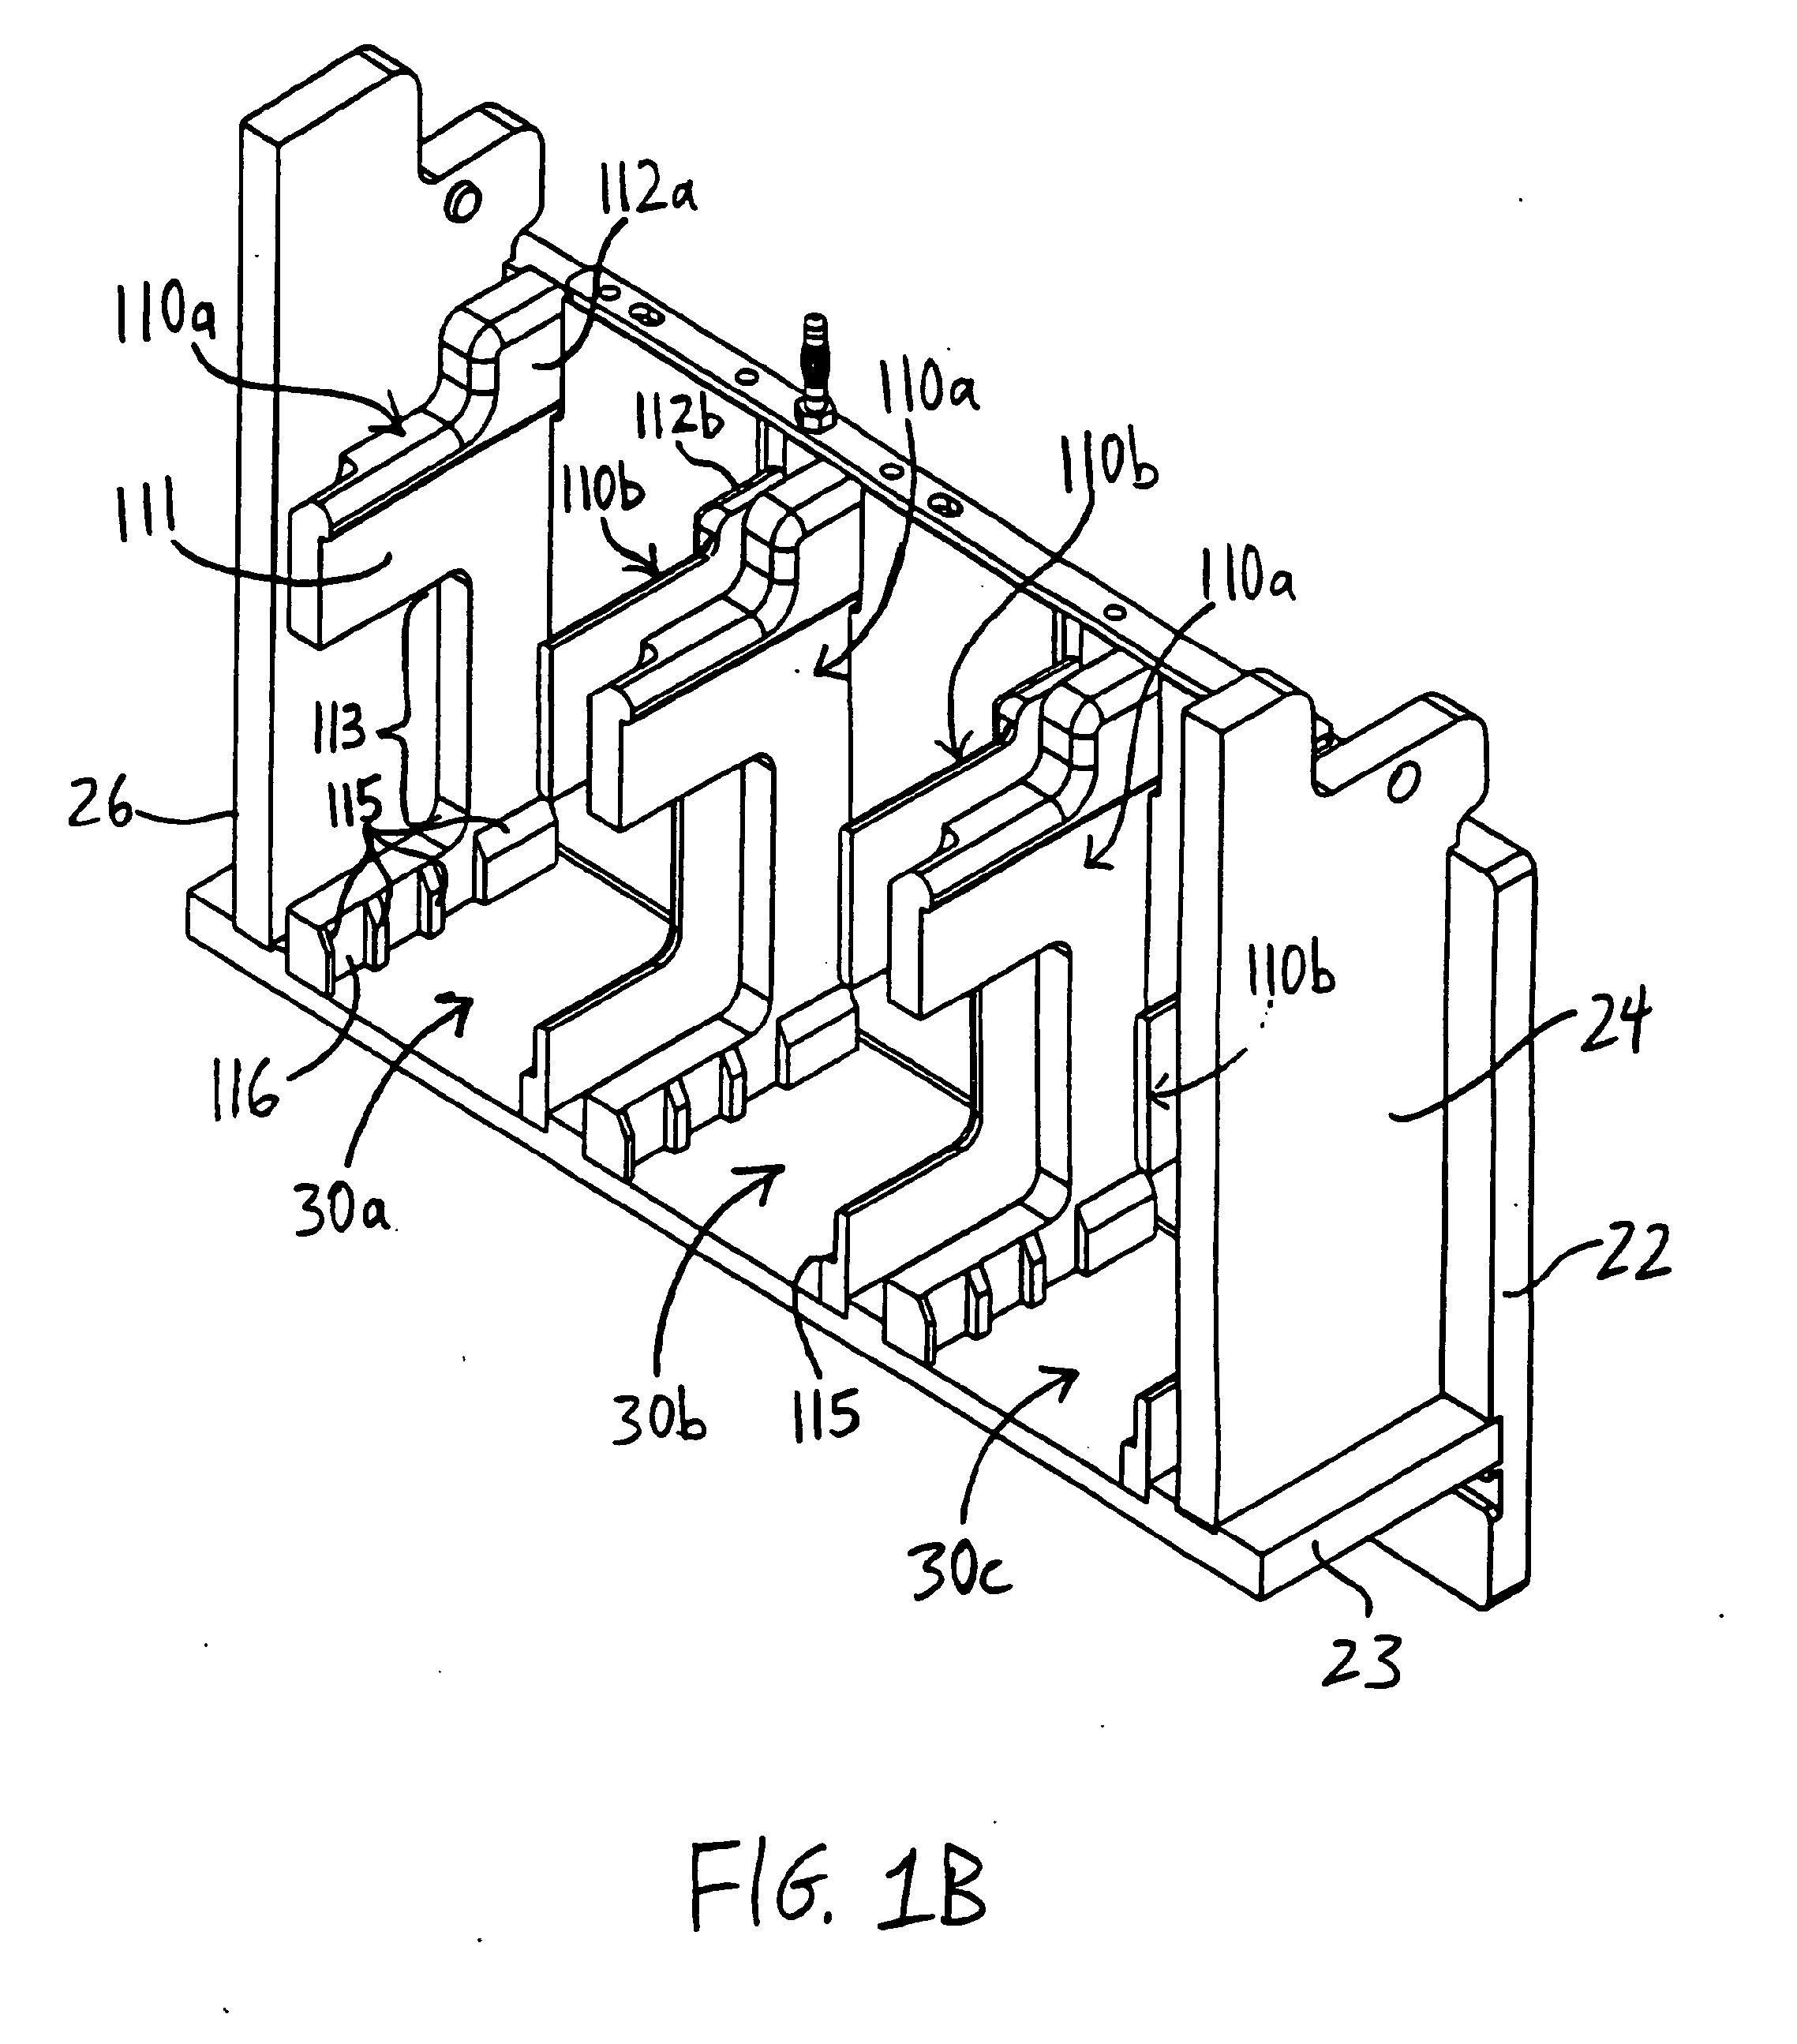 Apparatus for concurrent electrophoresis in a plurality of gels